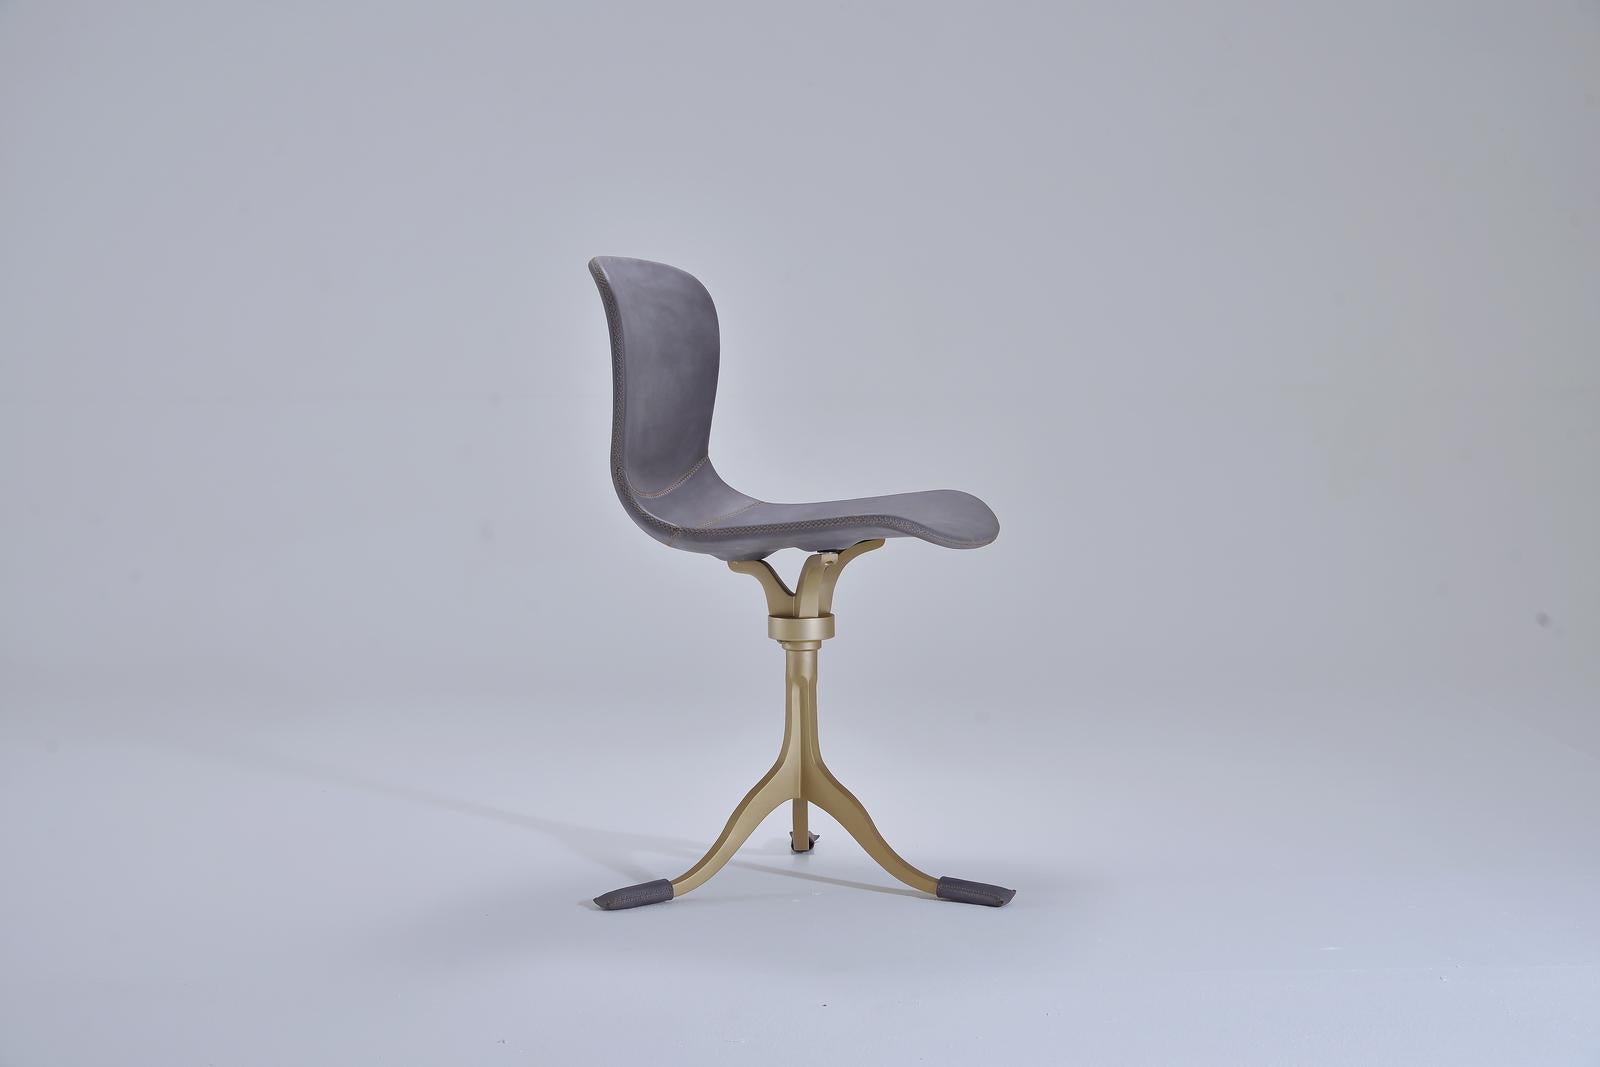 Model: PT43 Chair with Swivel
Seat: Leather
Seat color: Grey
Base: PT43 base, with swivels and hand cast brass
Base finish: Golden sand
Dimensions: 52 x 50 x 81 cm (seat height 46 cm)
(W x D x H) 20.5 x 19.7 x 31.89 inch (seat height 18.1